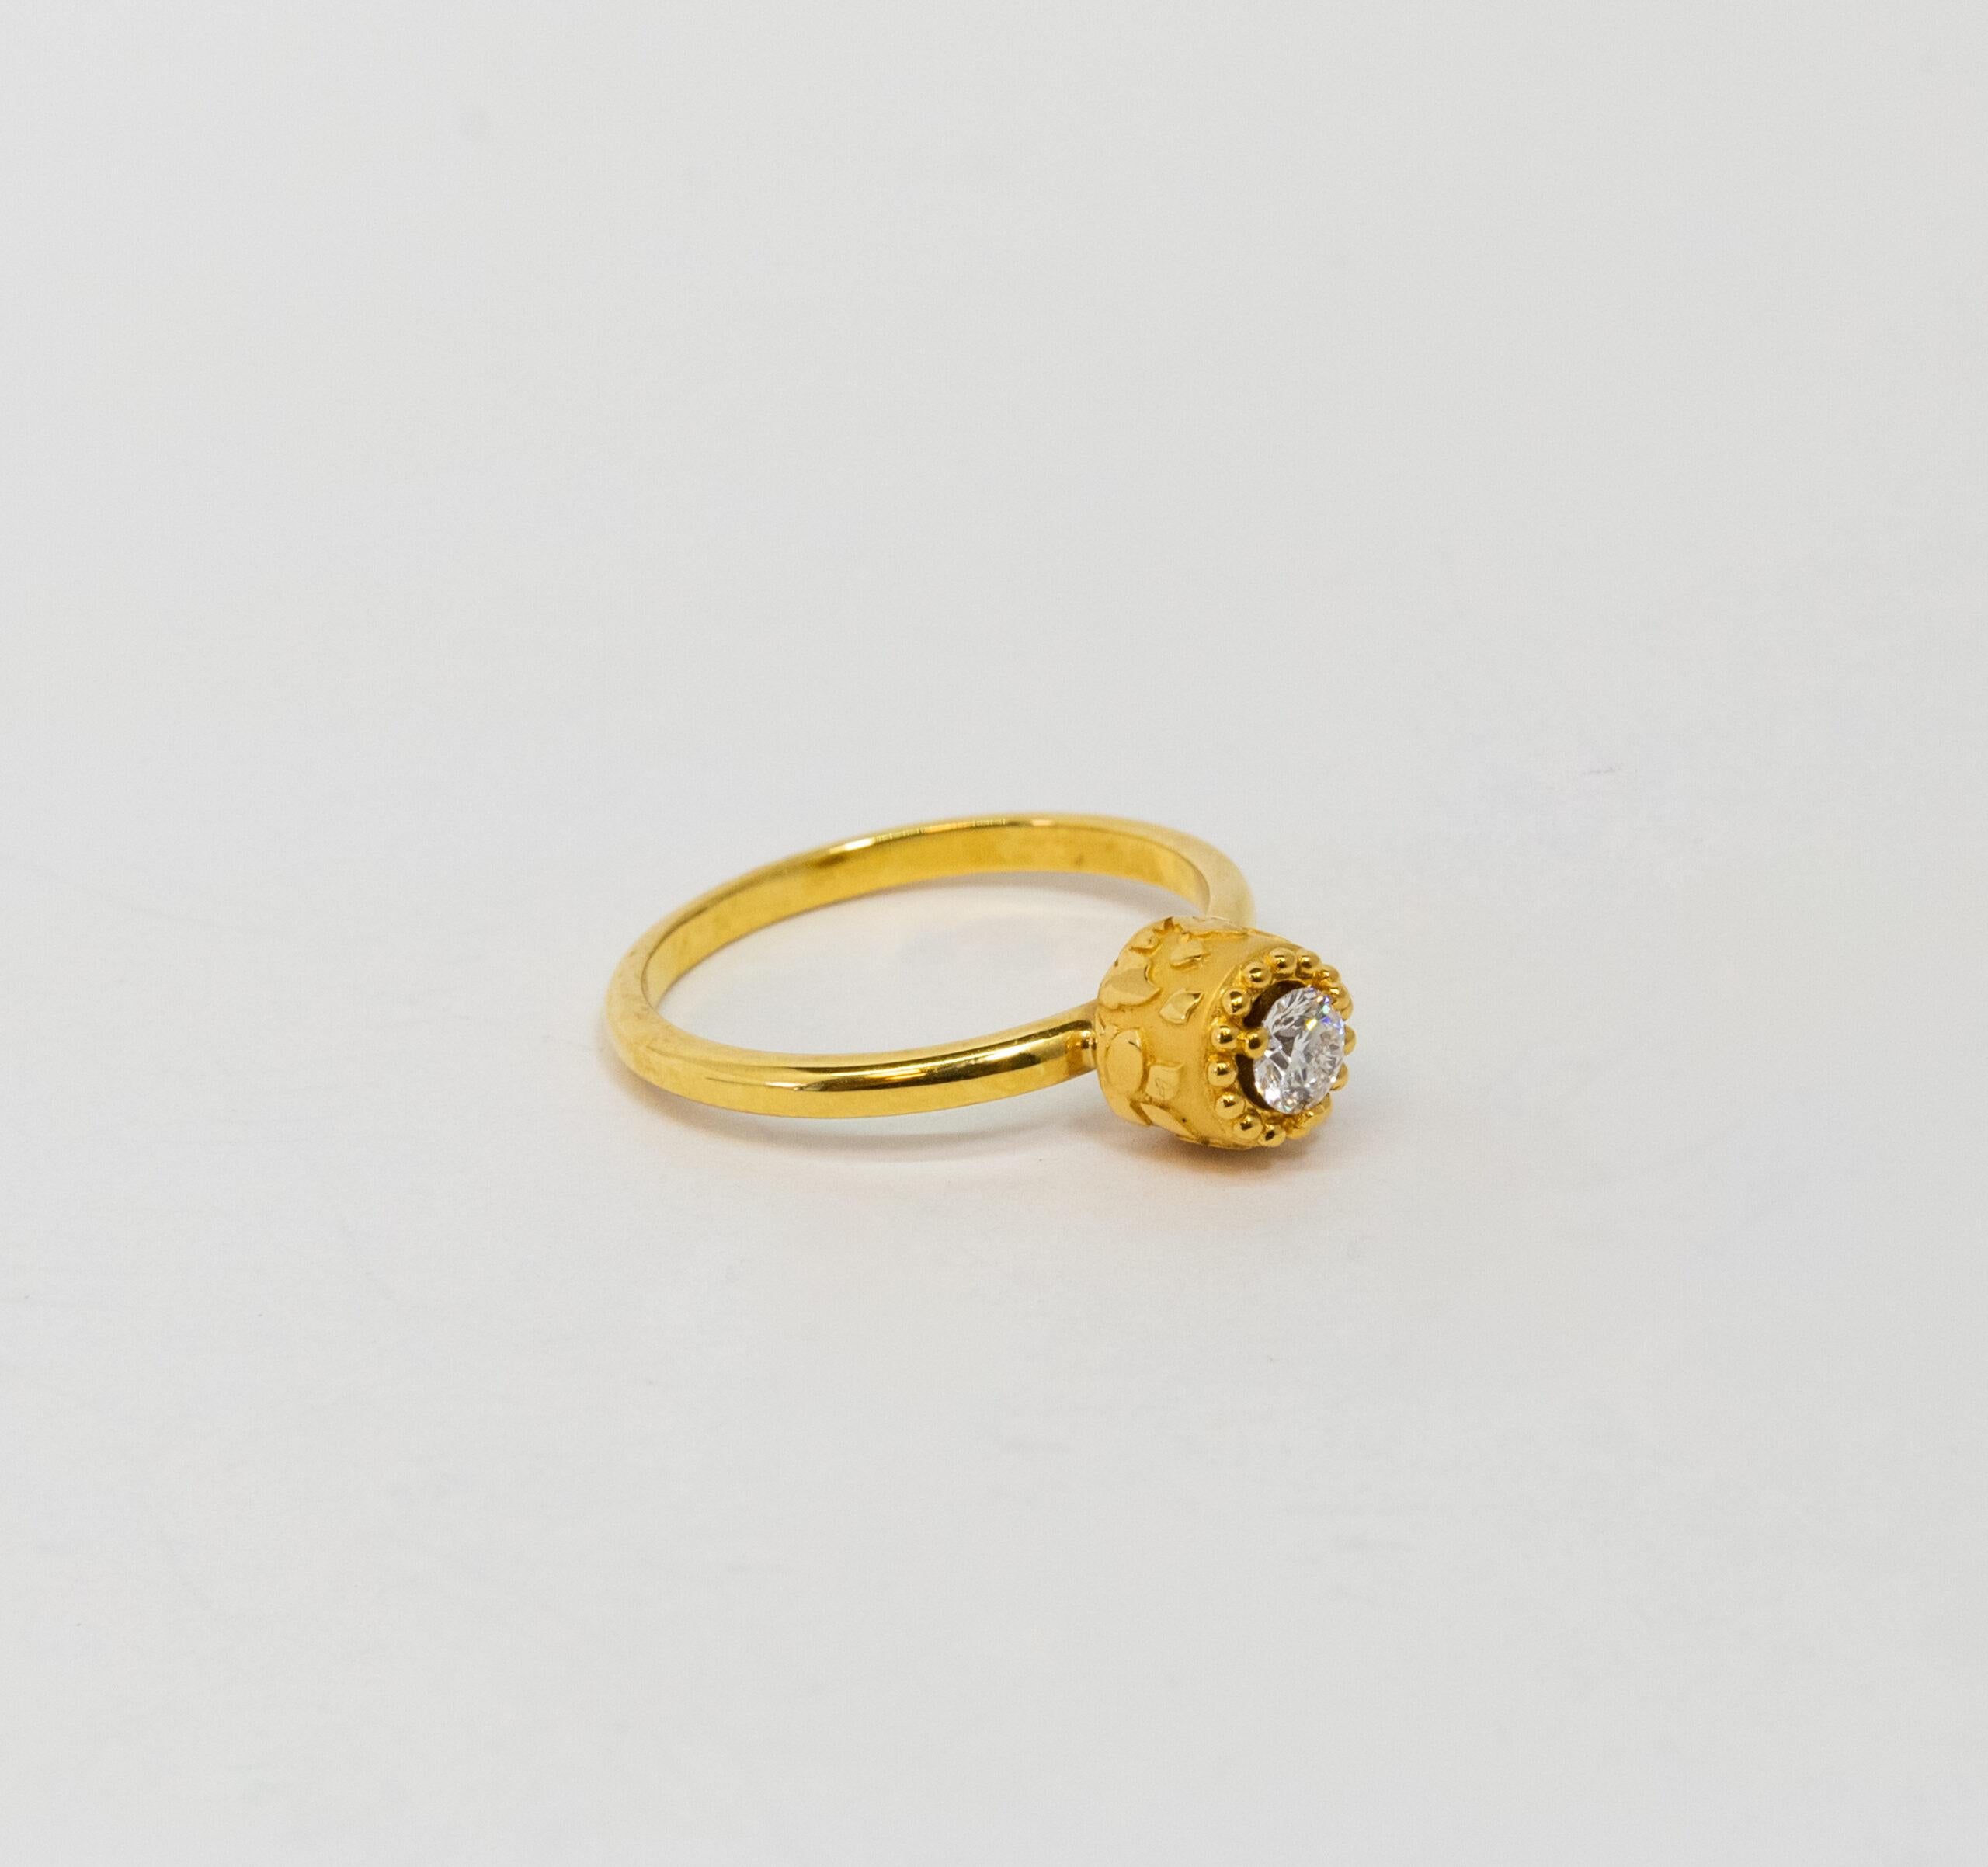 This ring is made of 18K Yellow Gold. It is decorated with a round-cut diamond (~0.20ct).

Size – 56 (7.5 US)